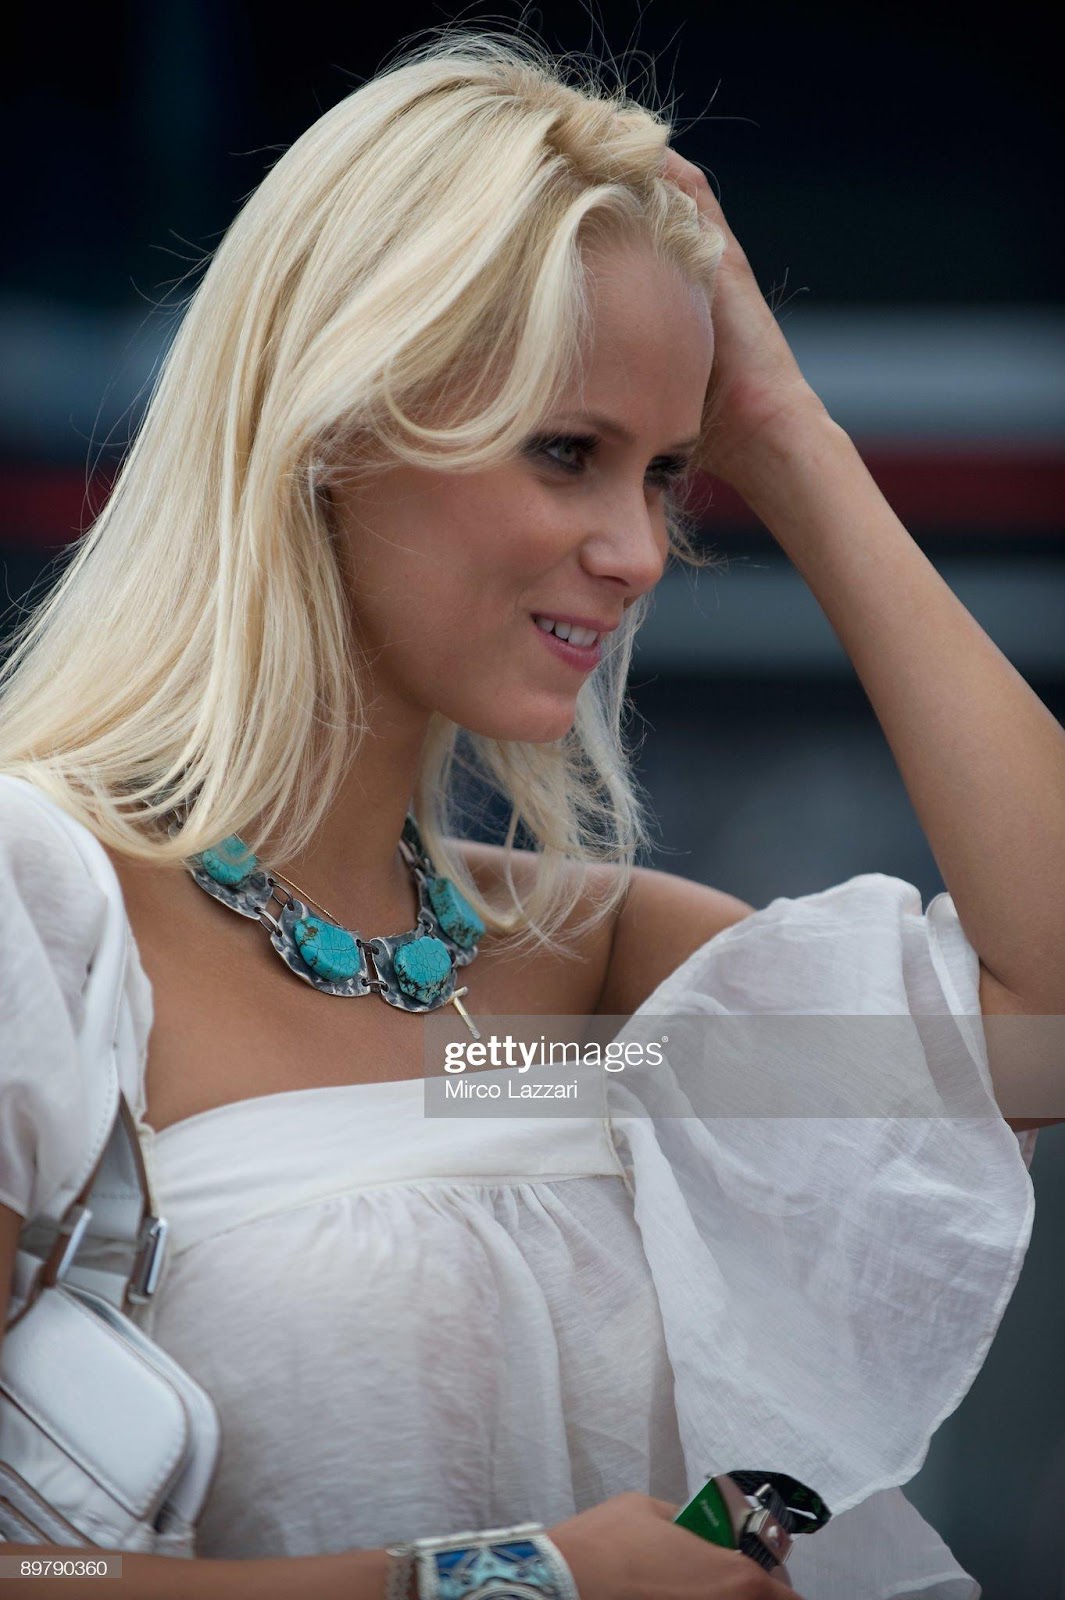 D:\Documenti\posts\posts\Women and motorsport\foto\Getty e altre\grid-girl-poses-for-fans-during-the-pit-walk-of-the-motogp-world-picture-id89790360.jpg